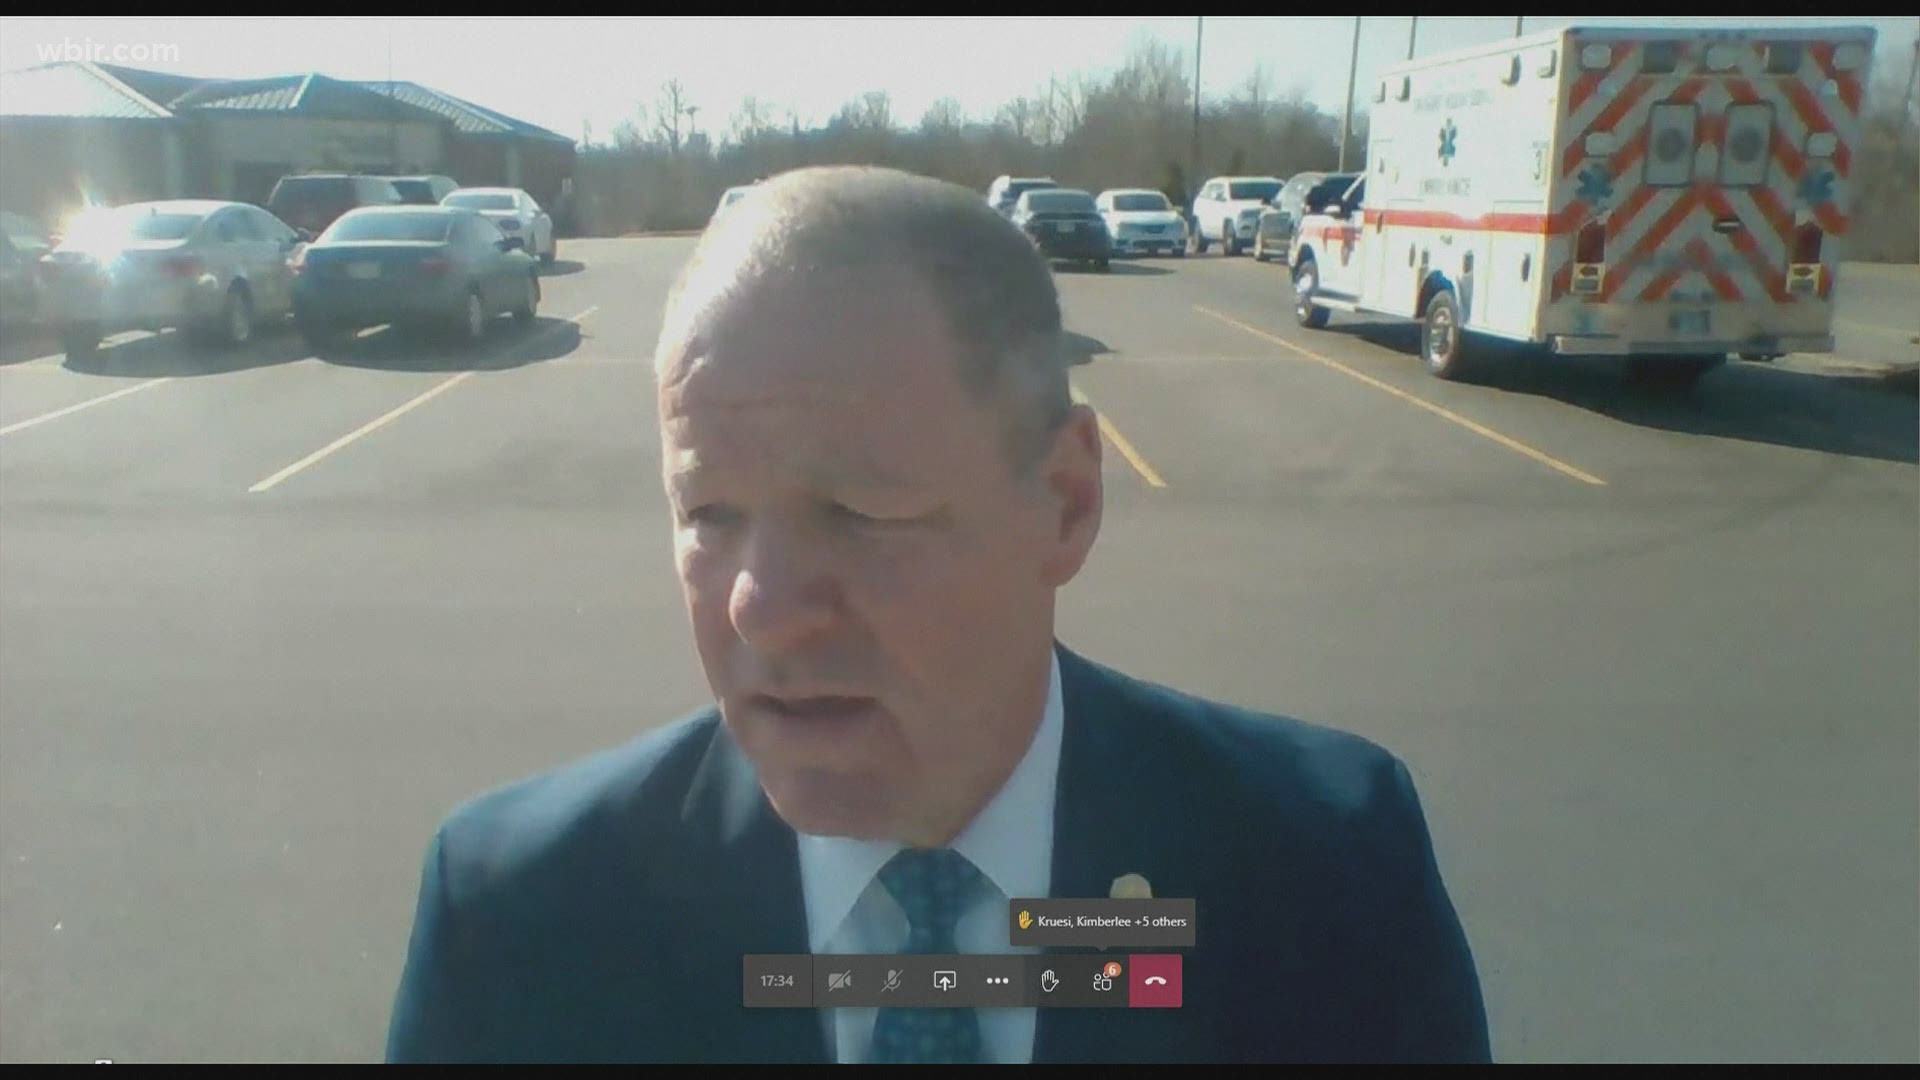 TBI Director David Rausch said Sunday's incident in which a man was playing recordings from a truck in Wilson isn't tied to Friday's bombing in Nashville.